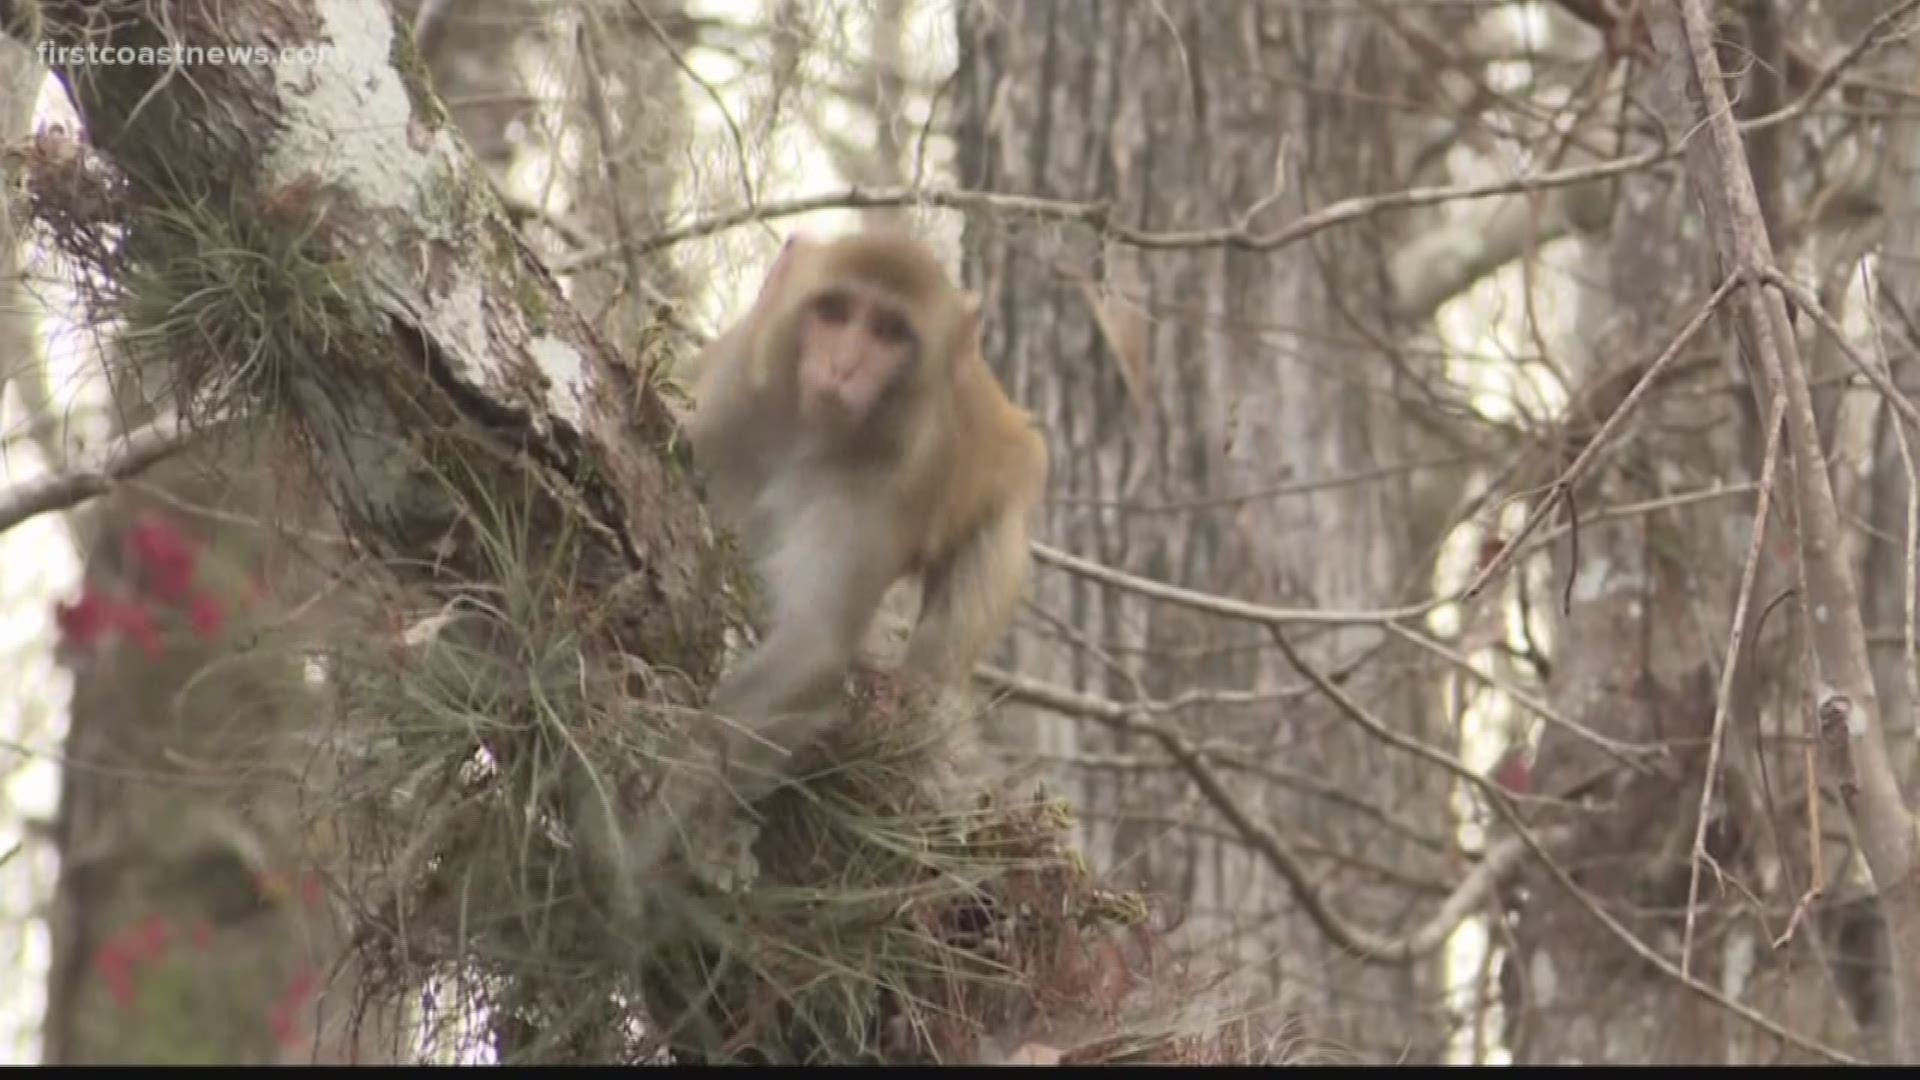 State regulators have received more reports of First Coast monkeys over the past three weeks than in the preceding five months.